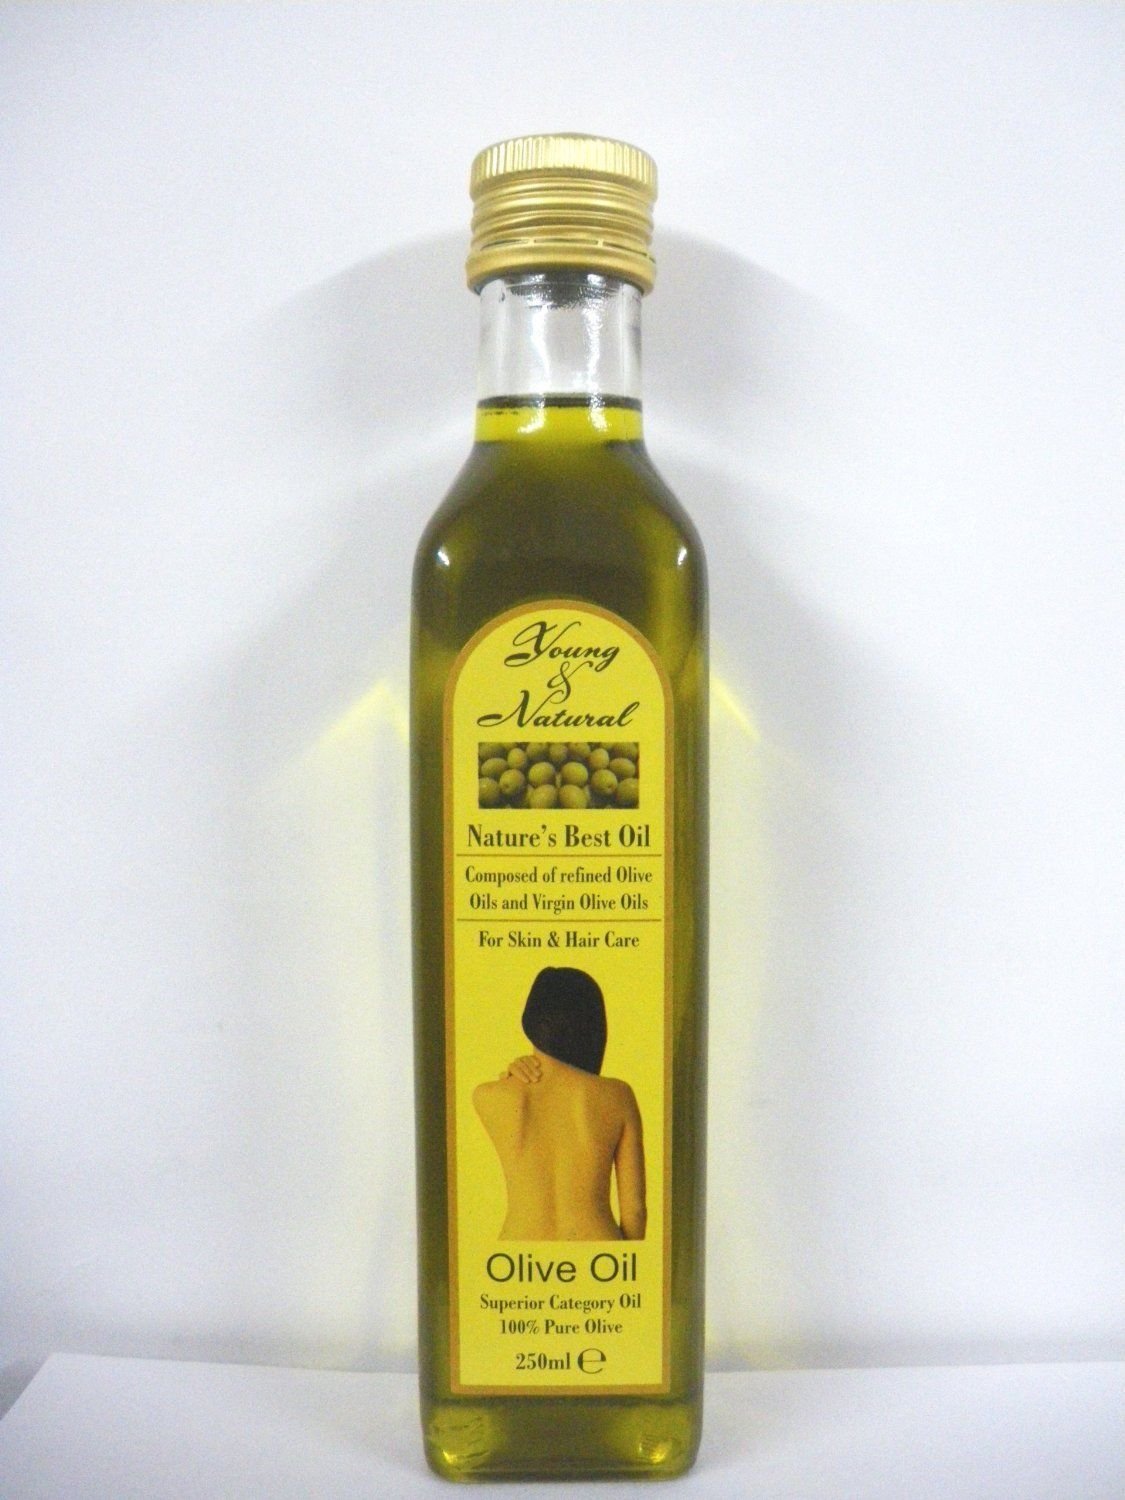 Оливковое масло для массажа. Abril Pure Olive Oil 250ml. Масло Пур олив боди Ойл. Оливковое масло my Olive Oil Superior Extra Virgin. Olive Oil масло для волос.